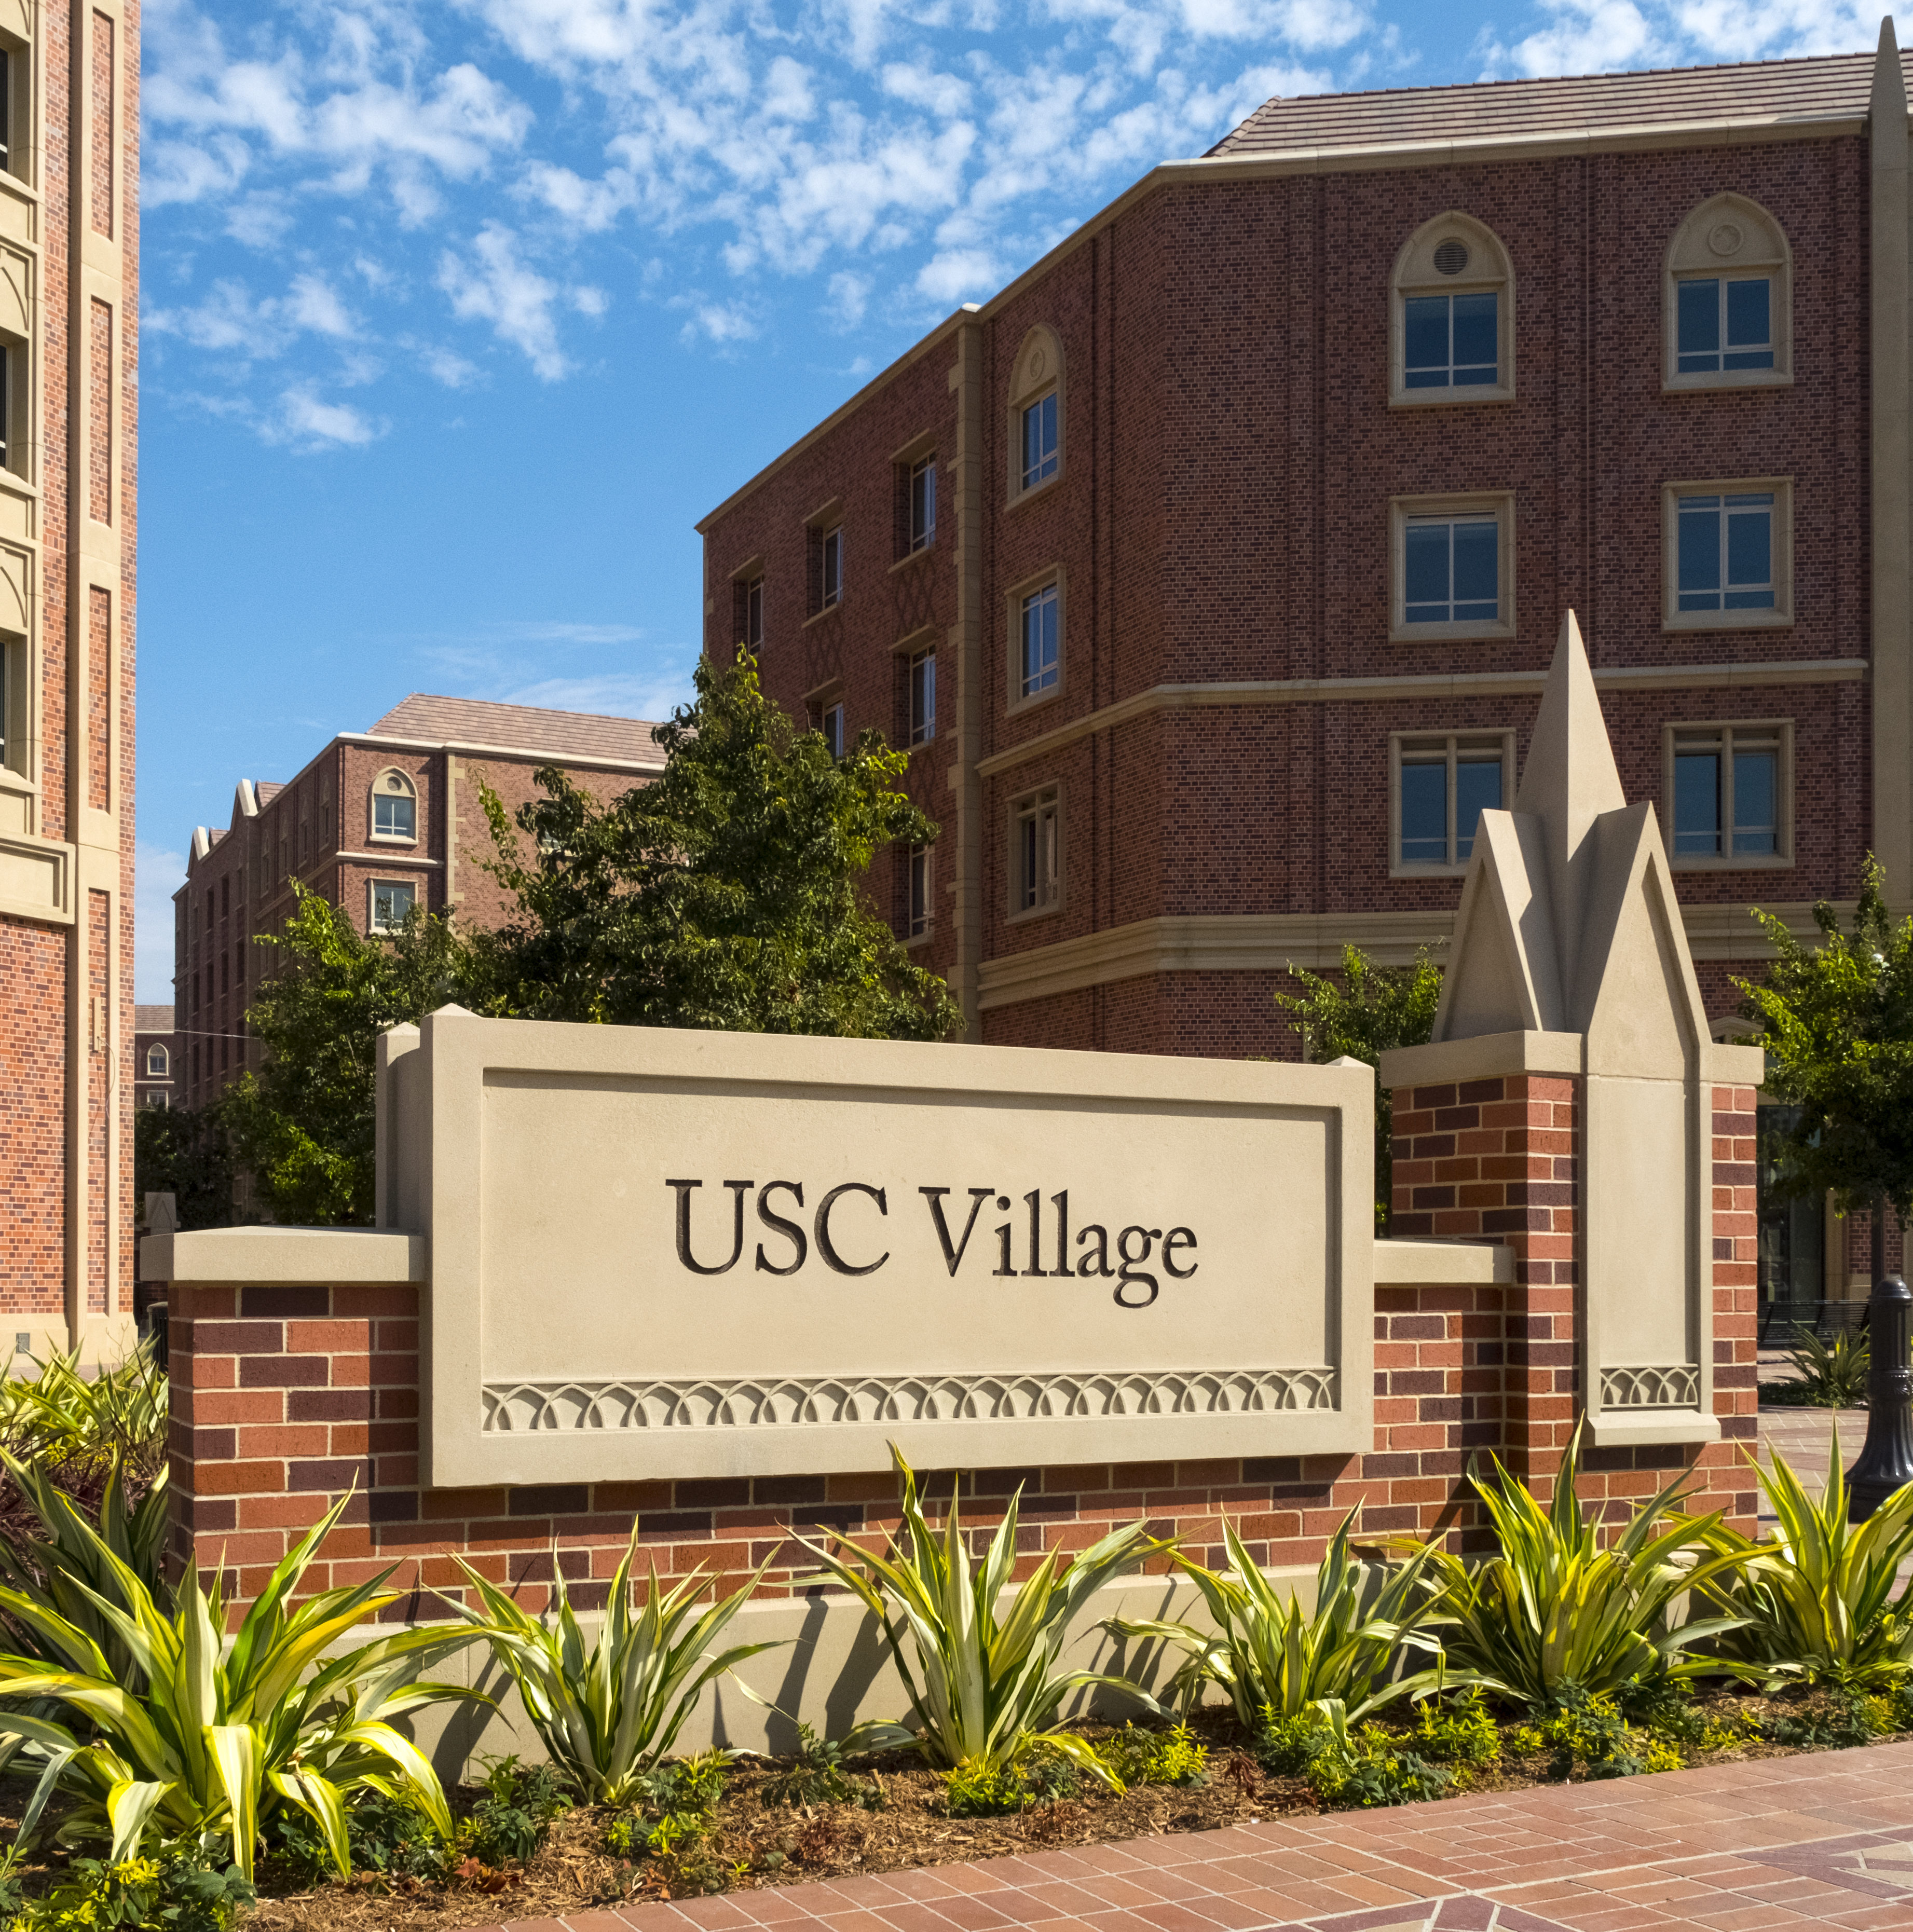 USC opens a new campus, but there’s concern about its soul